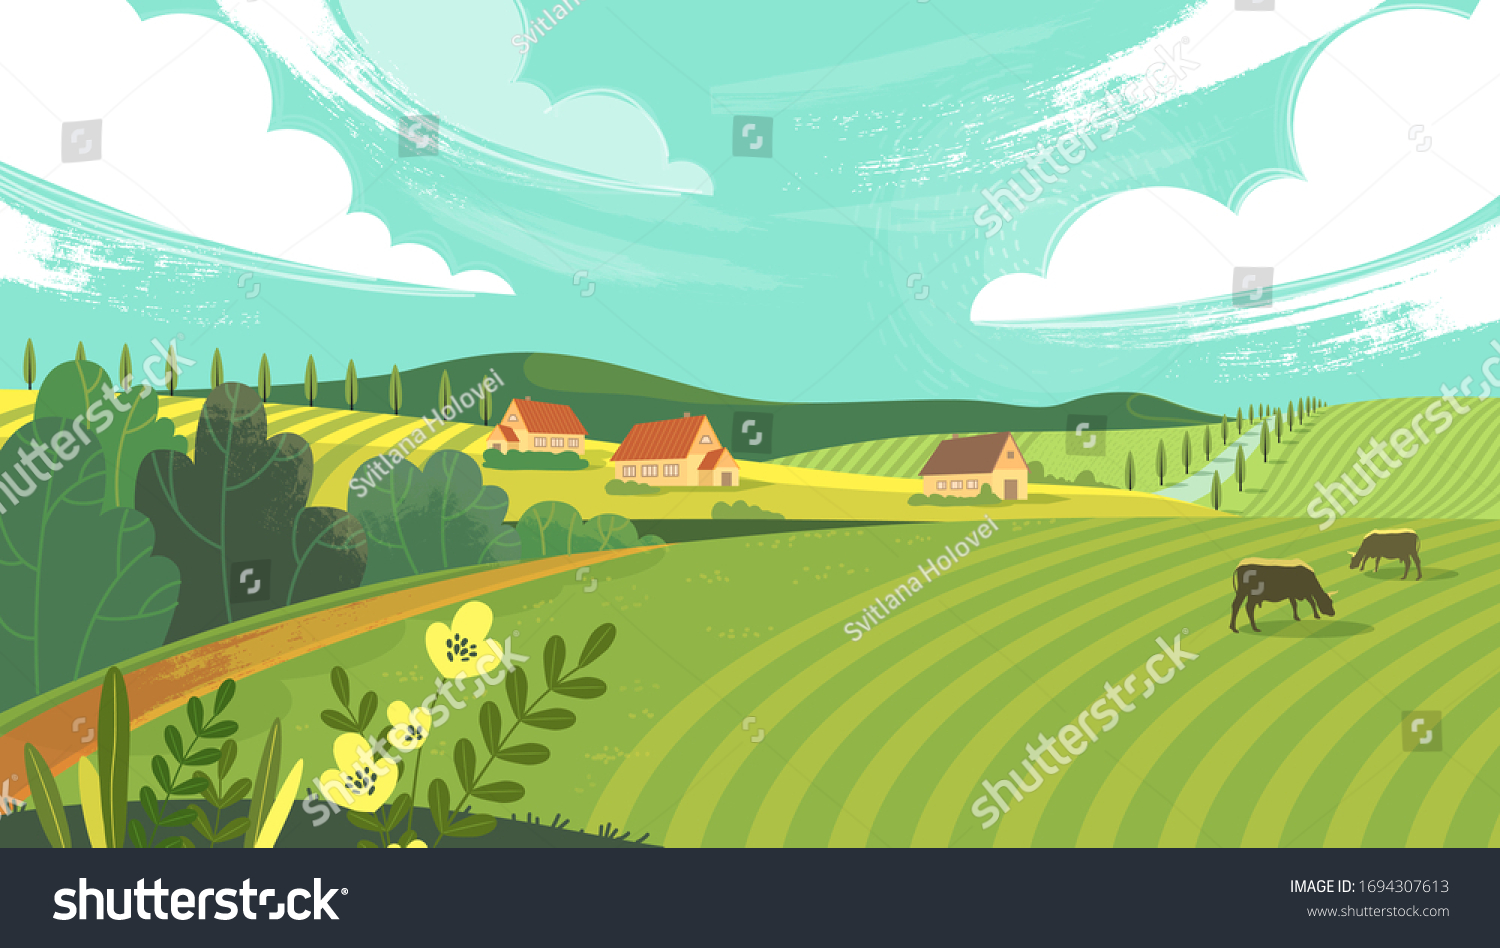 Rural landscape with field, trees, grass and cows. Ecologically clean area with blue sky and clouds. Village in the summer. Vector stock flat style illustration or background for eco products, banner. #1694307613